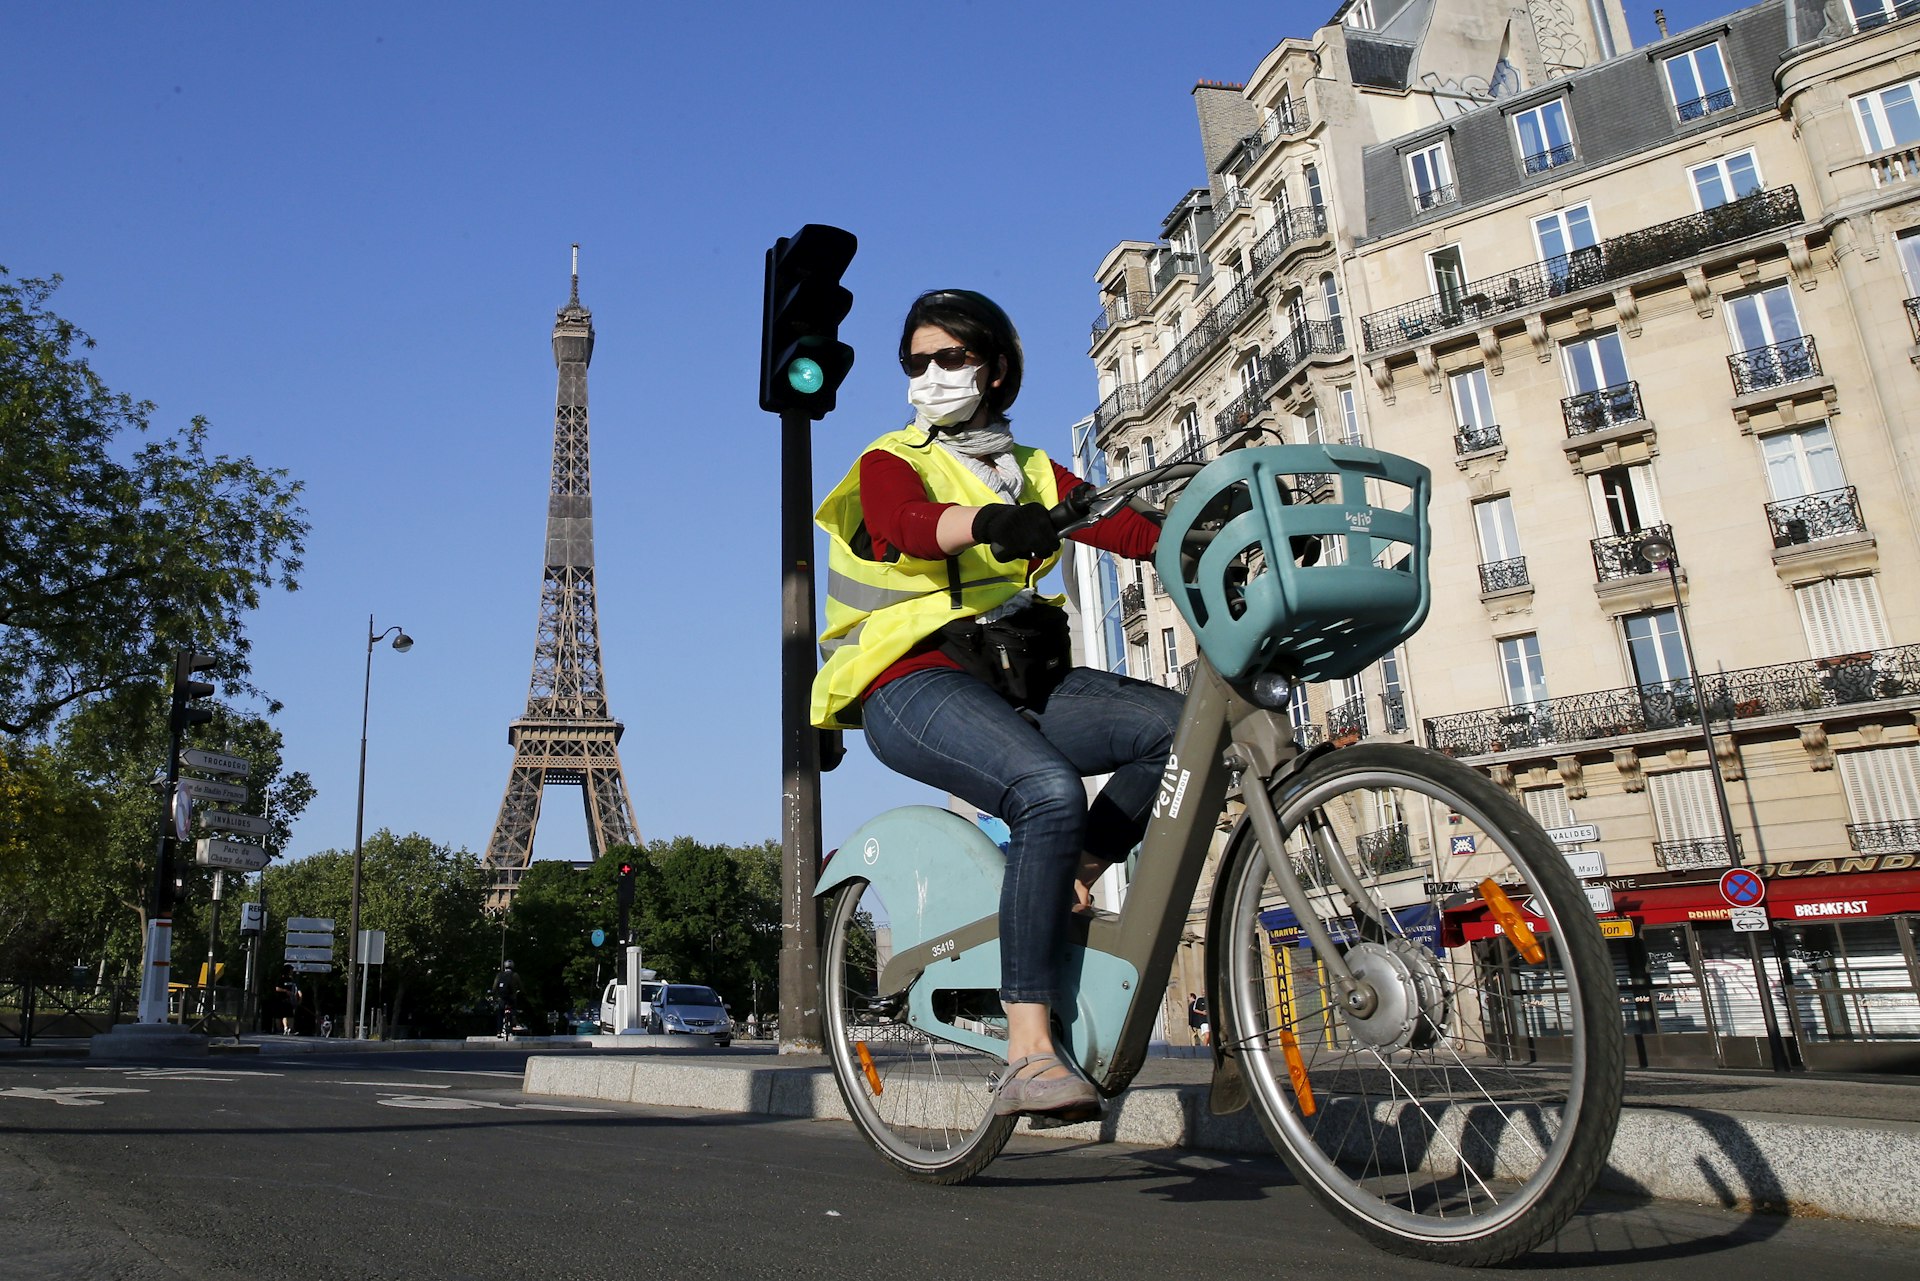 A woman wearing a protective mask rides her bicycle next to the Eiffel Tower as the lockdown continues due to the coronavirus outbreak (COVID 19) on April 23, 2020 in Paris, France.